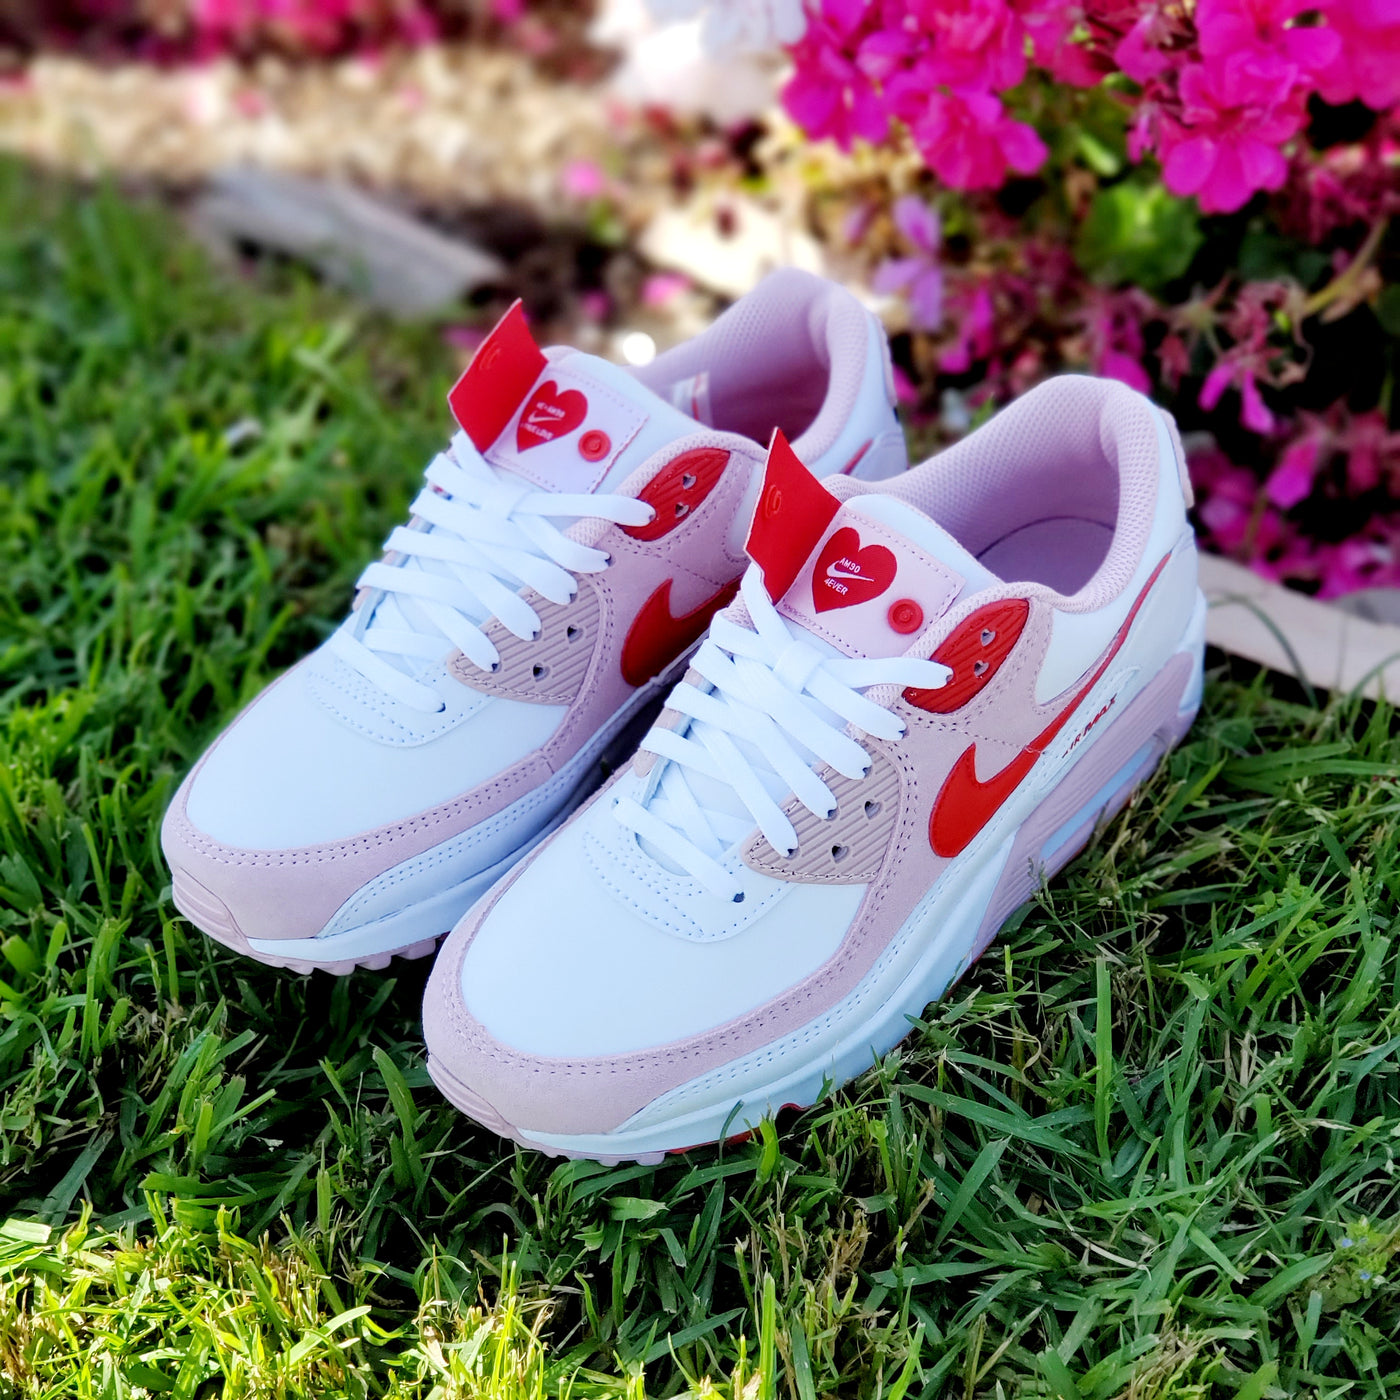 W NIKE AIR MAX 90 QS VALENTINE'S DAY LOVE LETTER